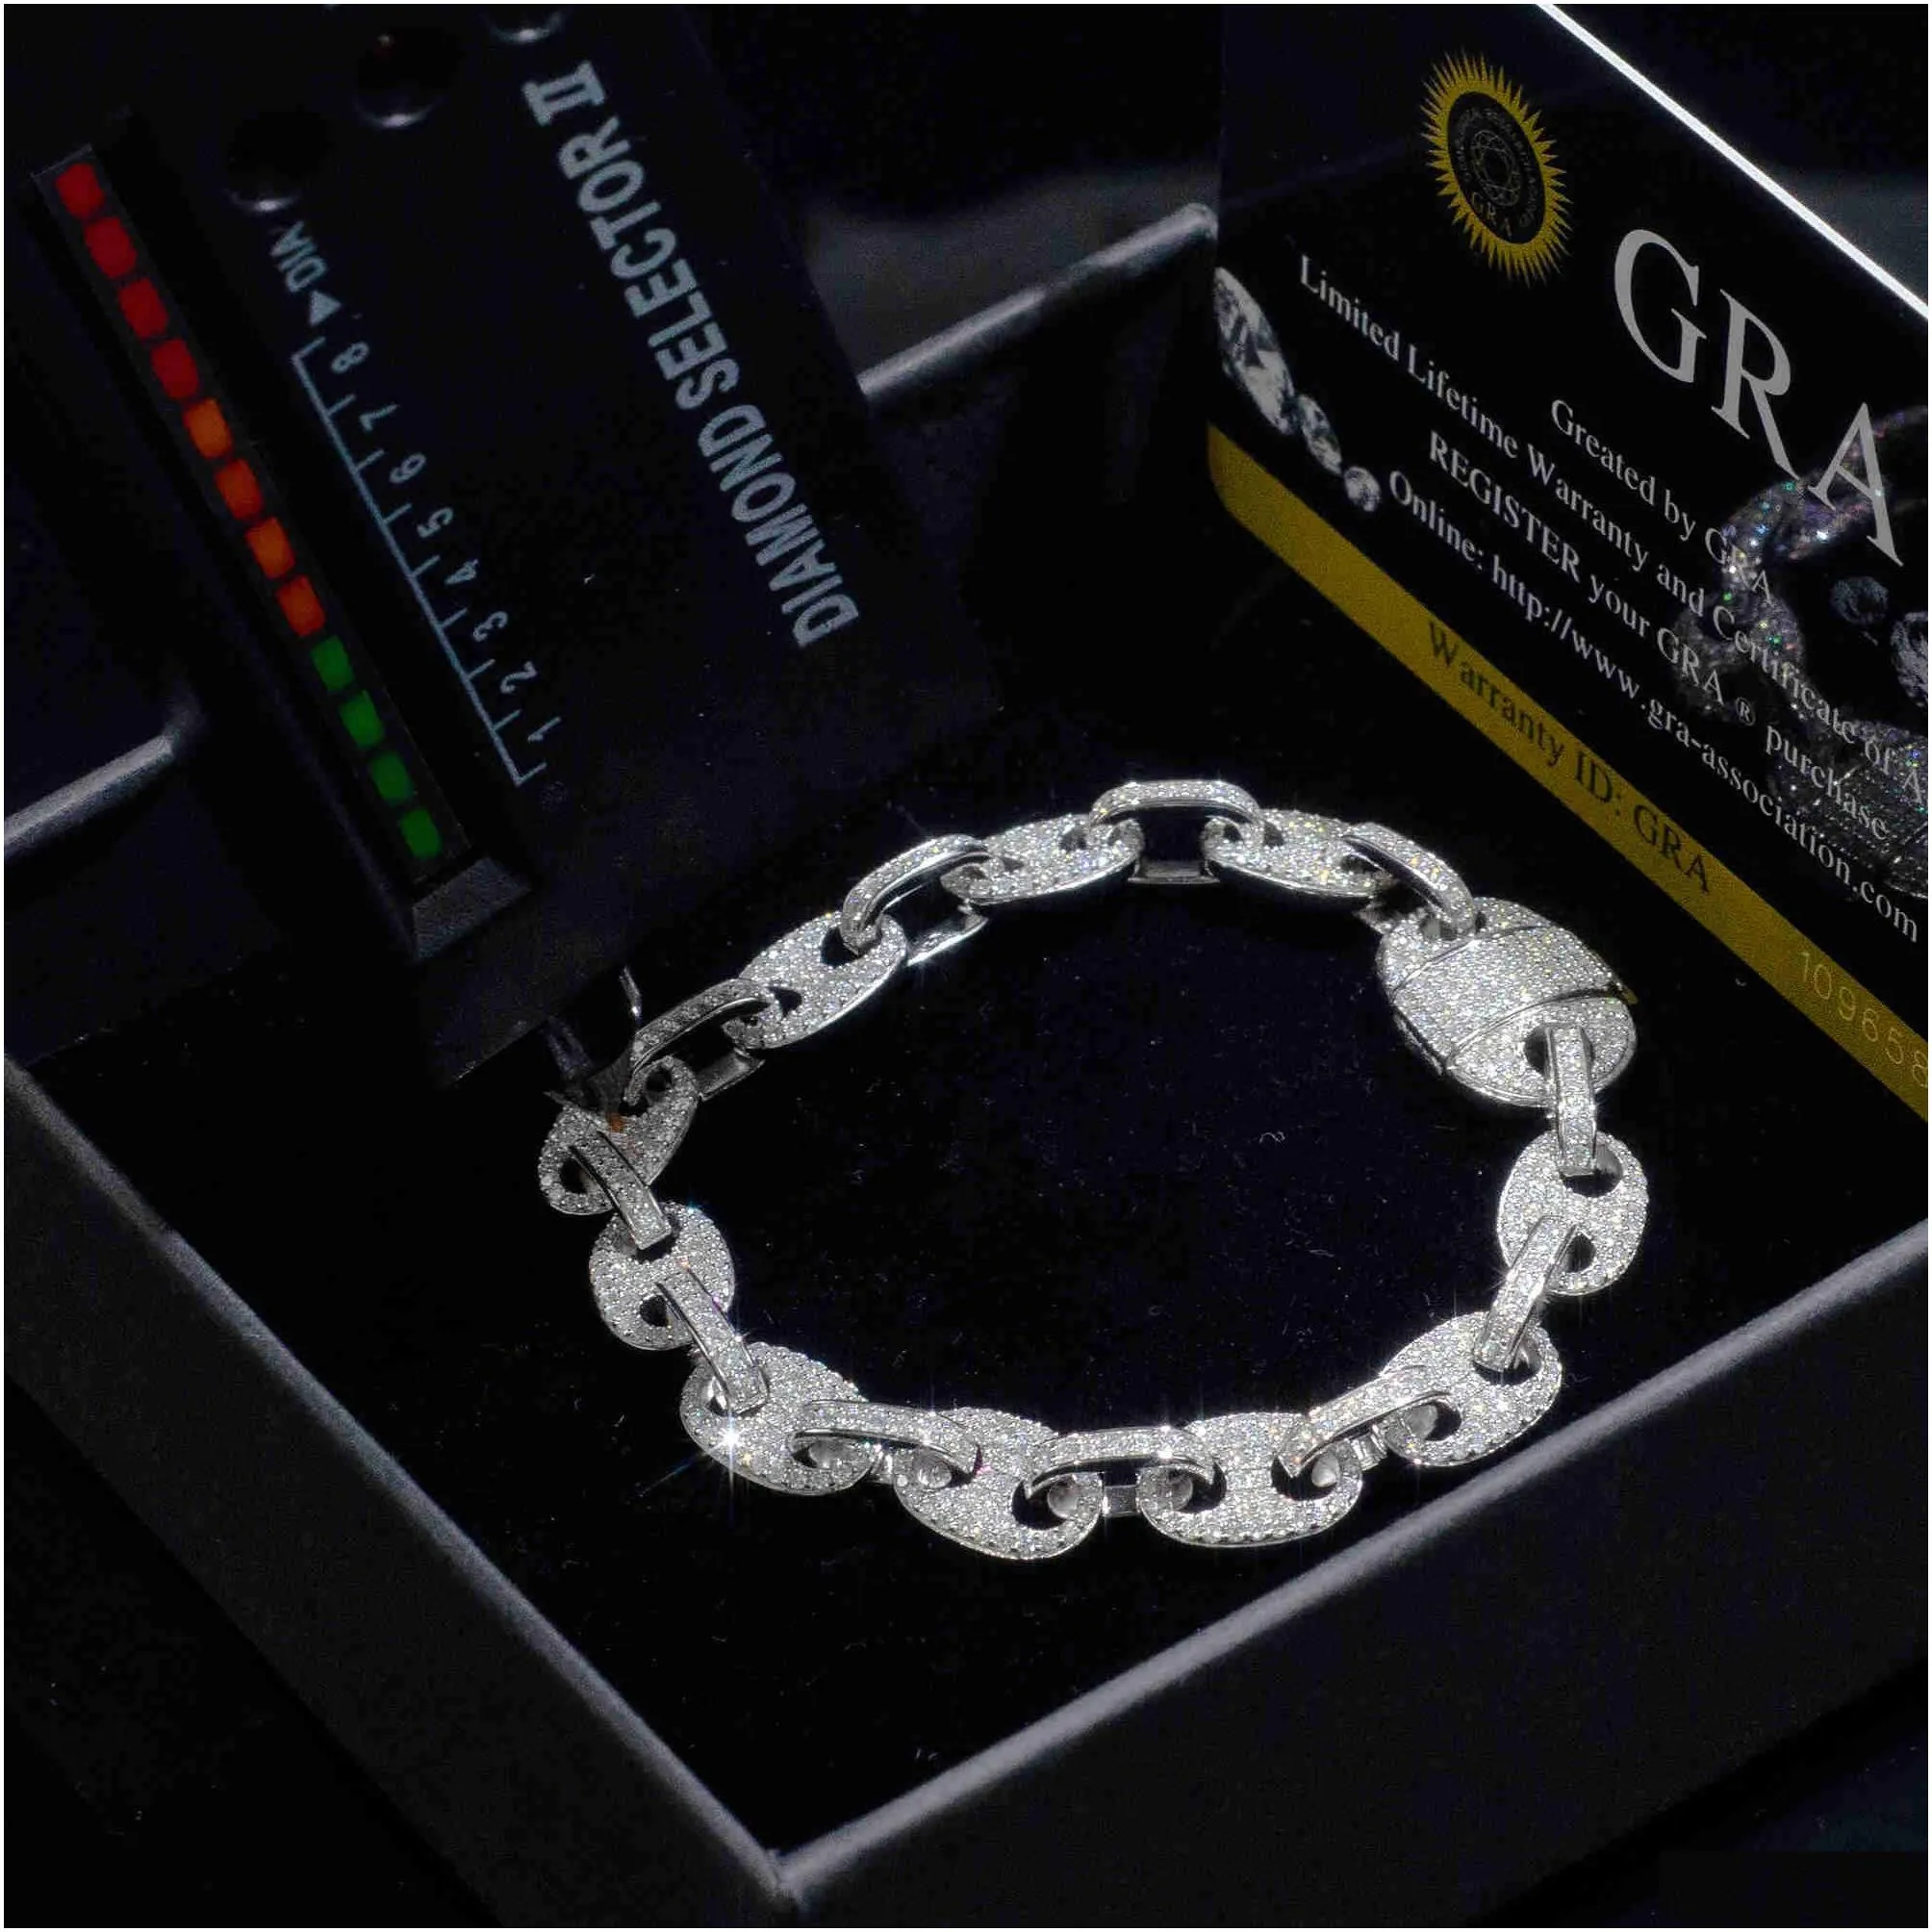 Pass Diamond Tester VVS Ice Out Moissanite Coffee Beans Cuban Link Chain 8mm Bracelet Sier Fine Jewelry for Man Woman